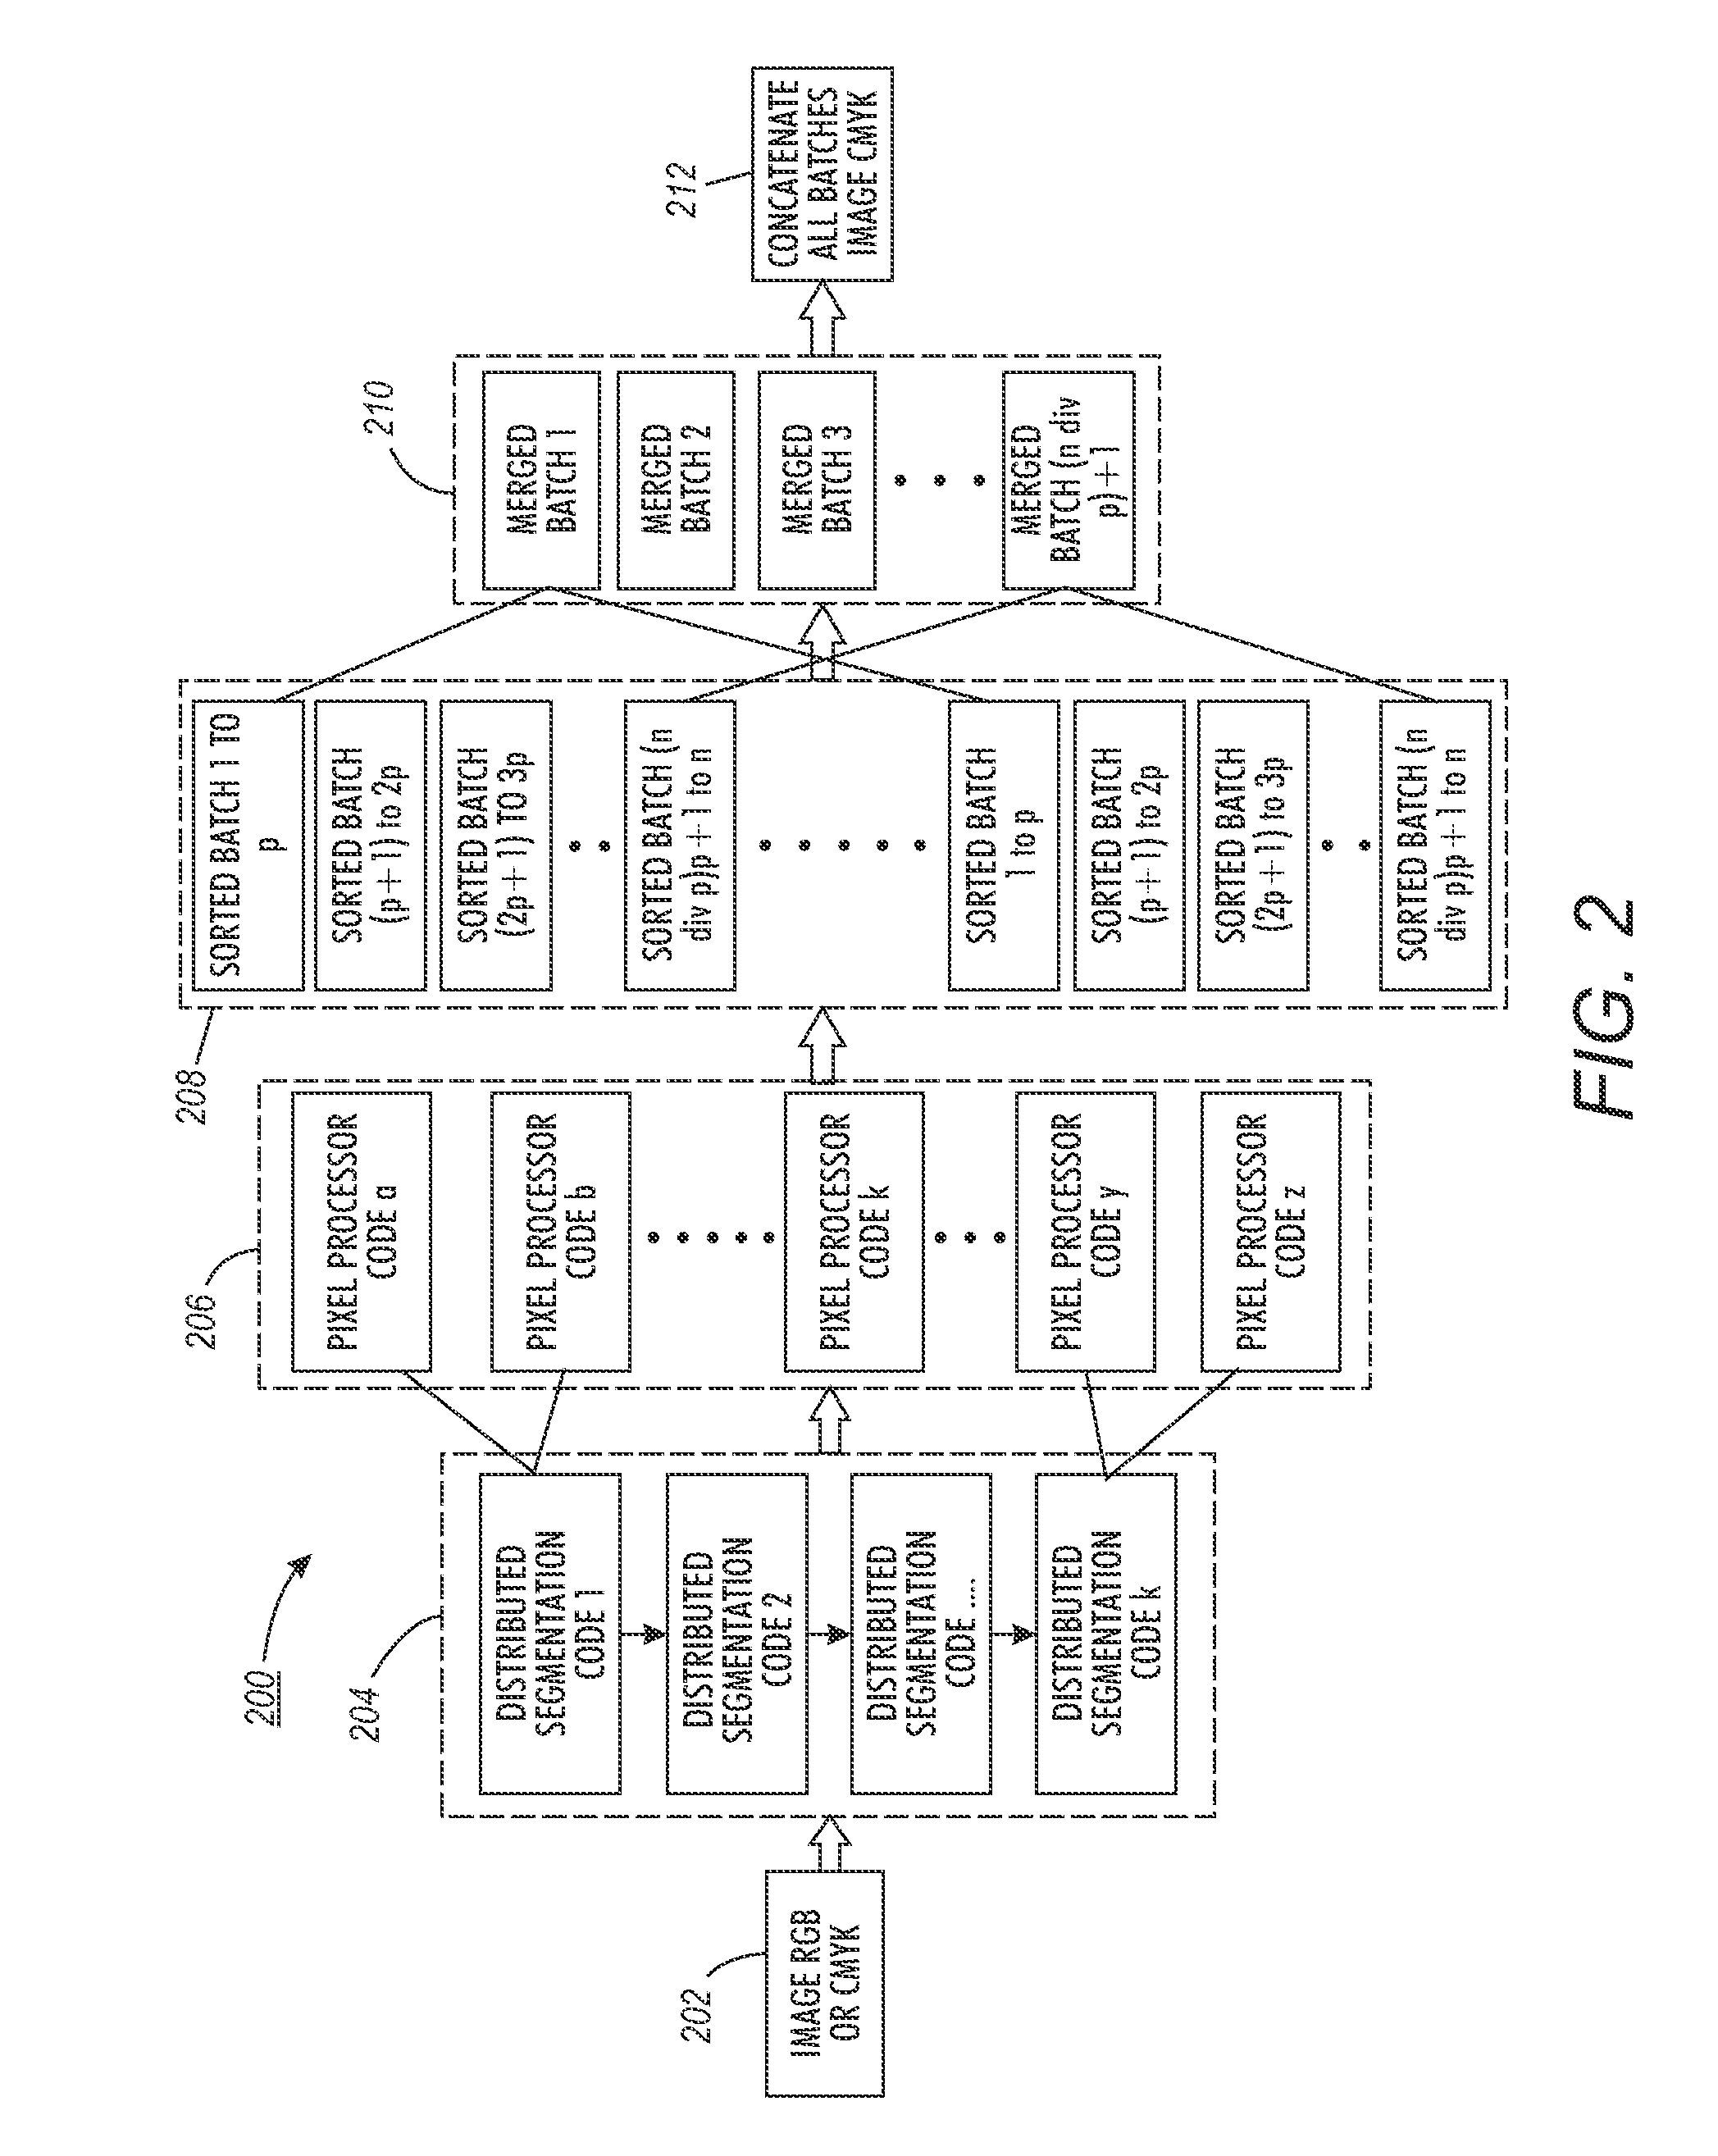 Synchronous parallel pixel processing for scalable color reproduction systems